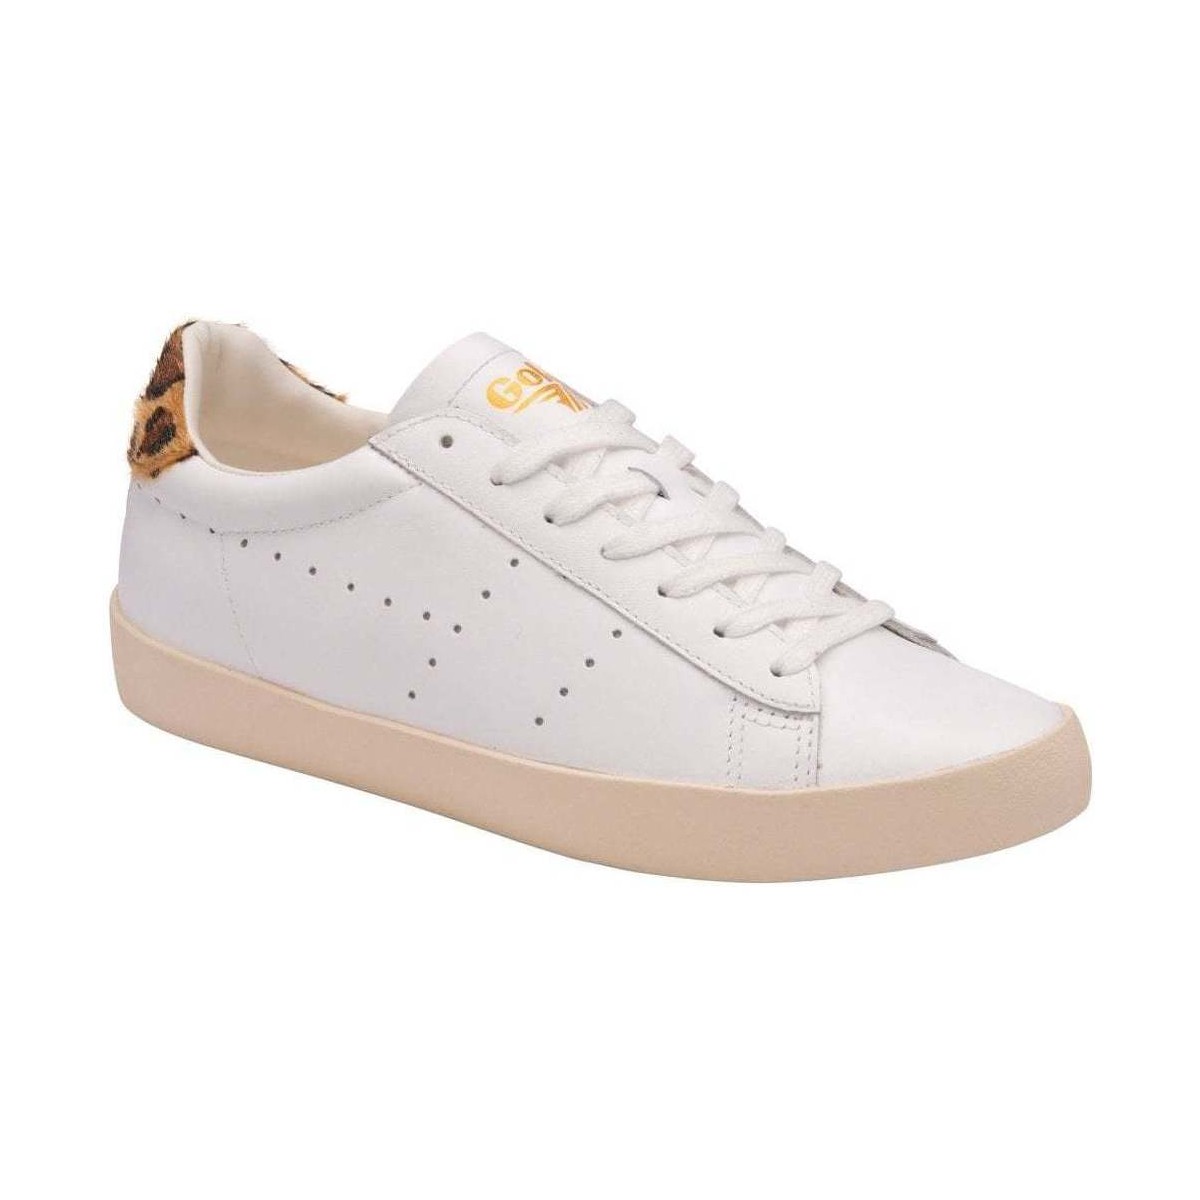 Shoes Women Derby Shoes & Brogues Gola Nova Leather Womens Casual Trainers White